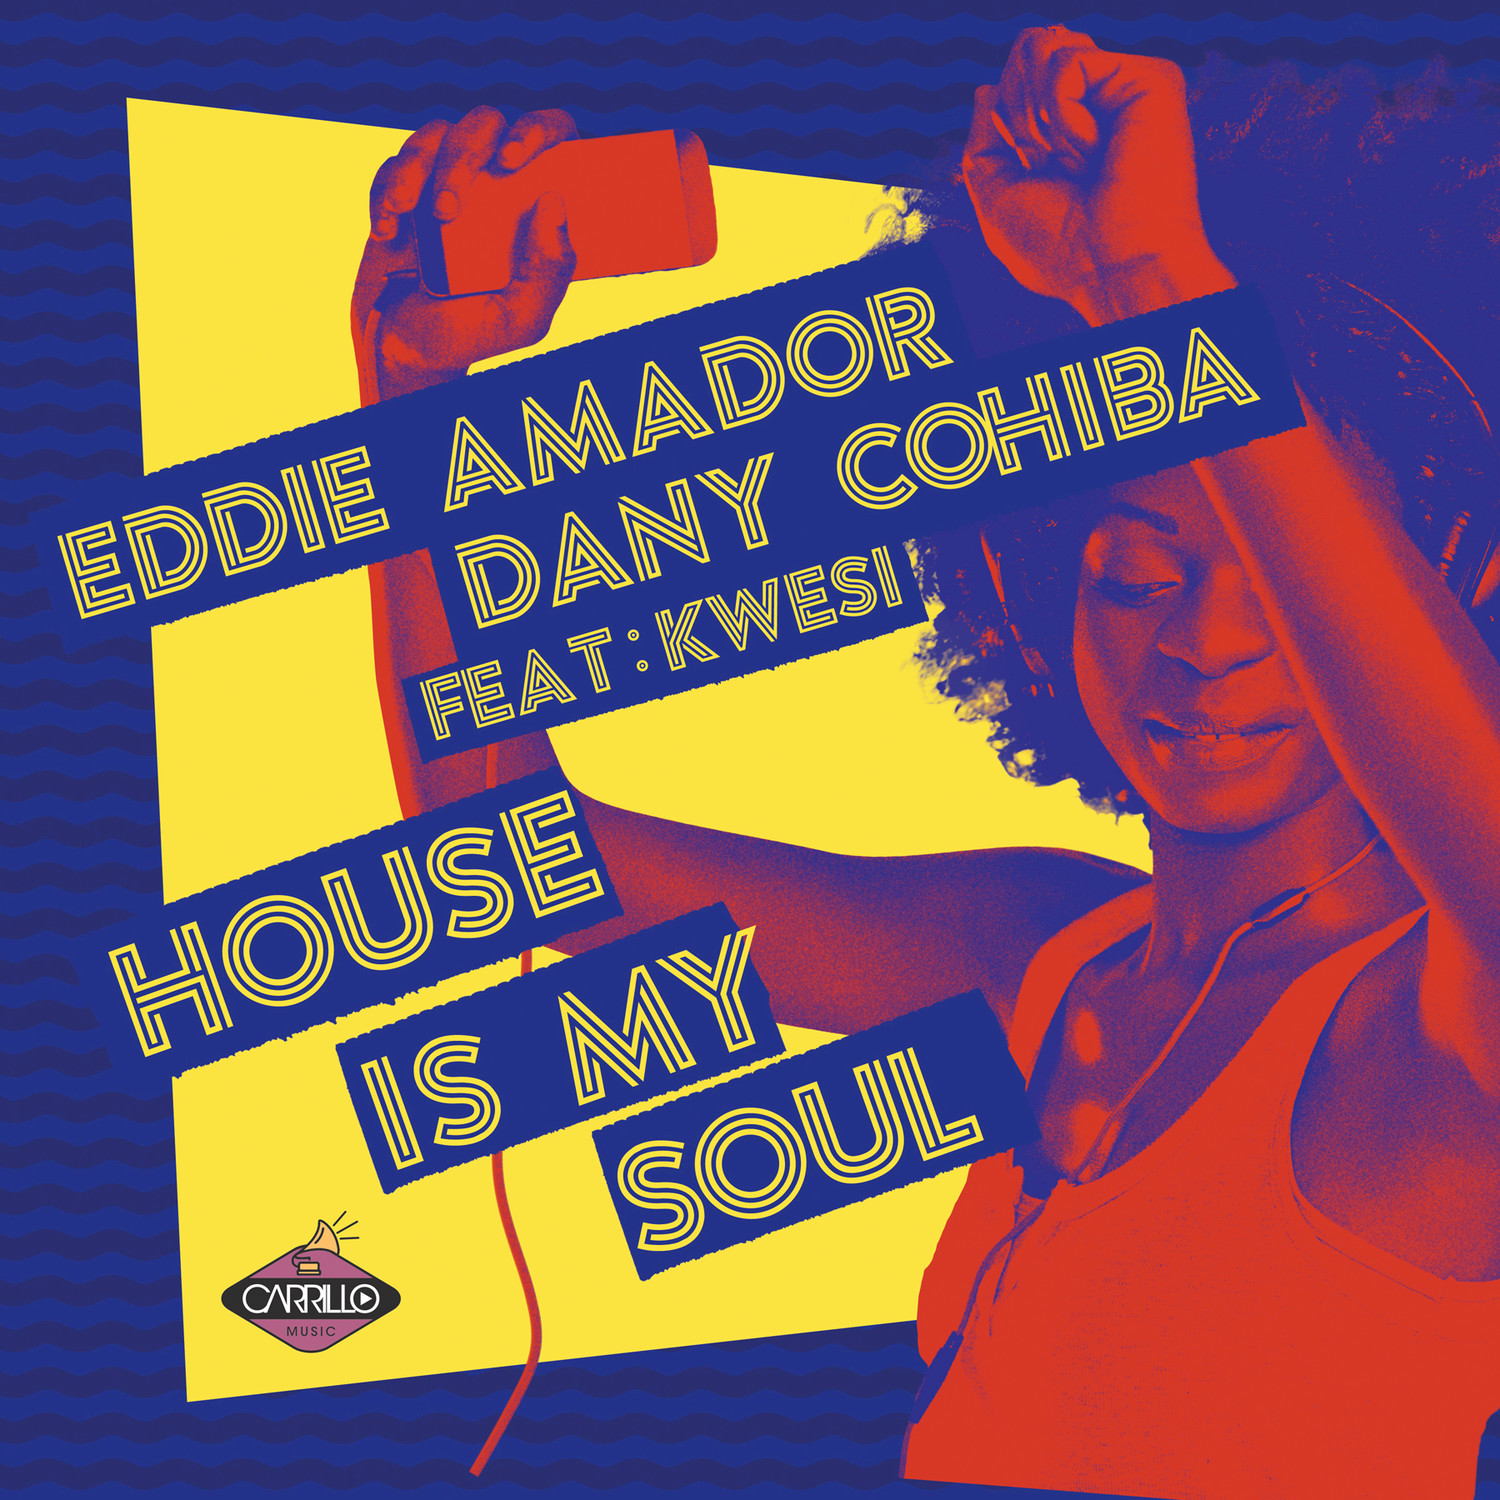 House Is My Soul (Rod Carrillo Club Mix)